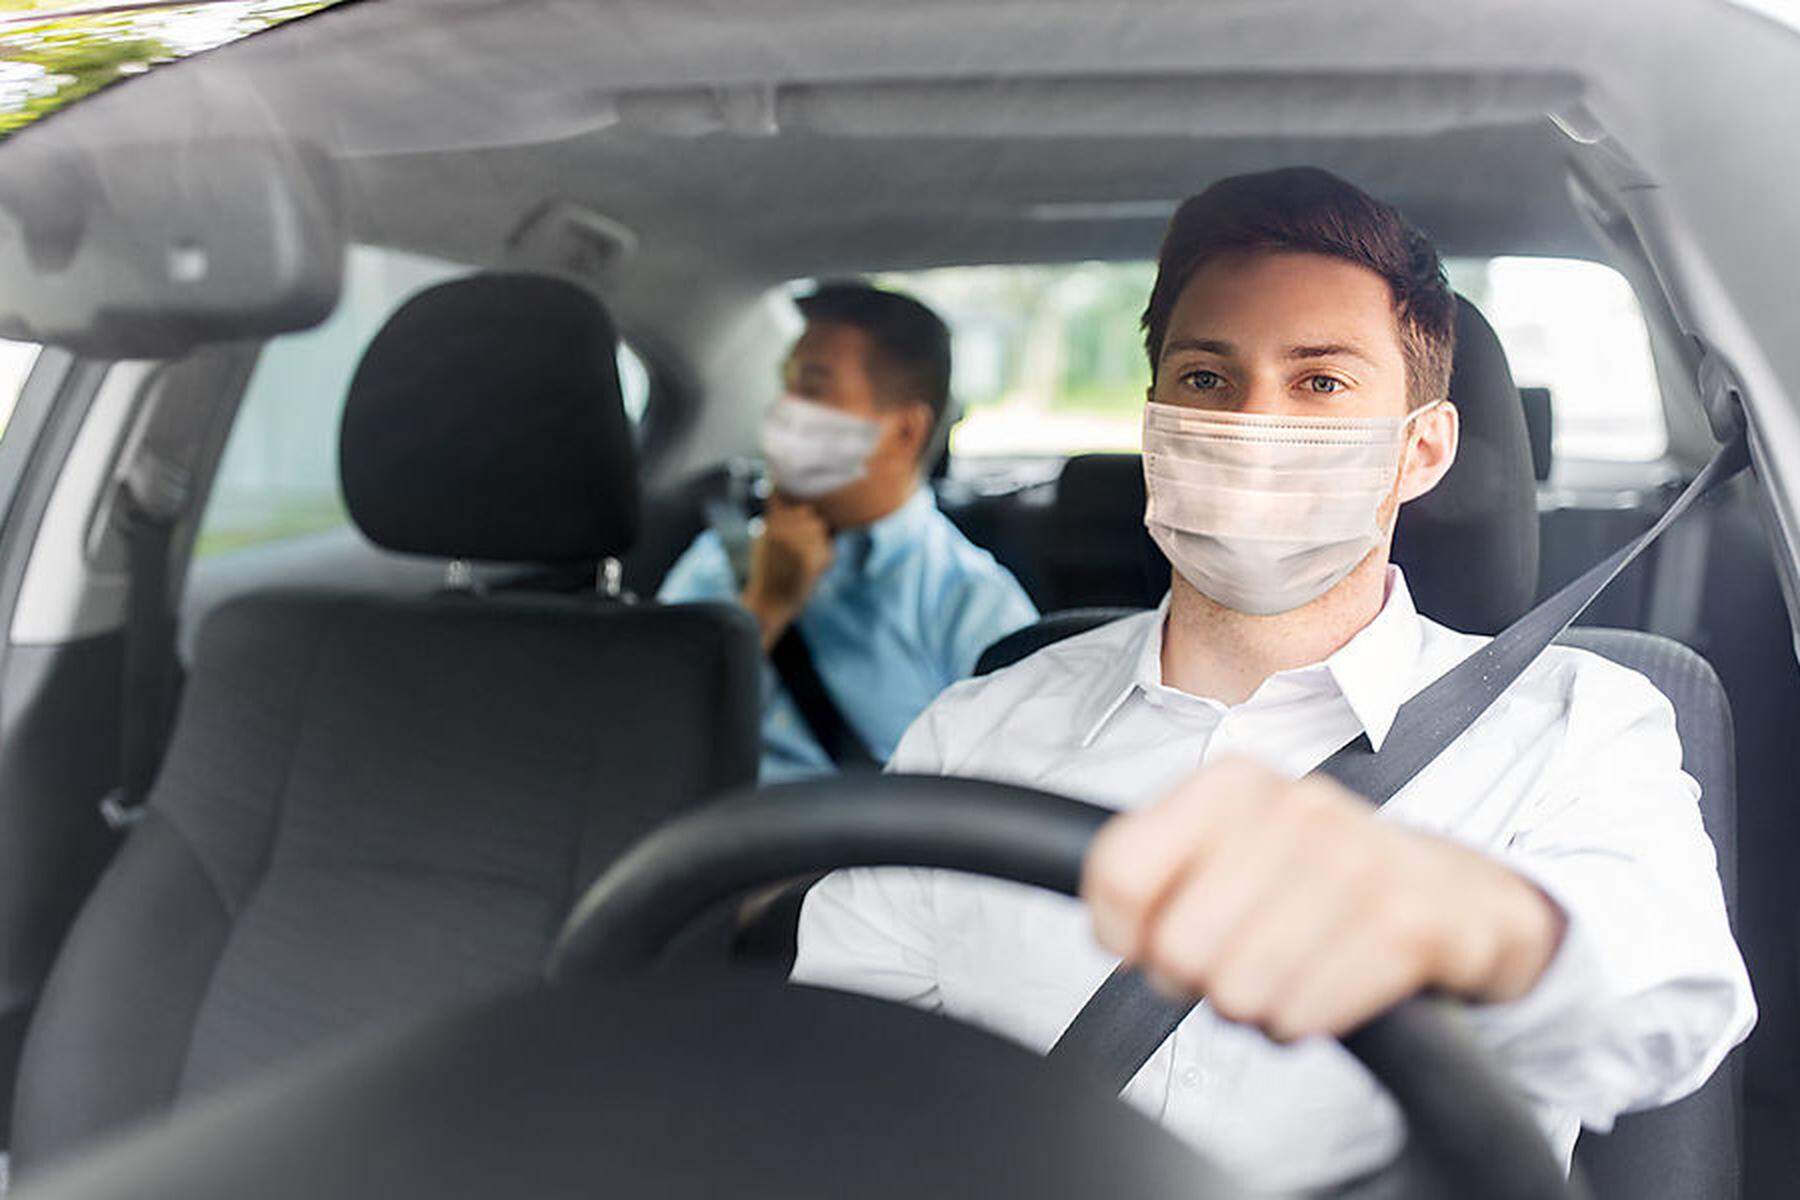 https://img.kleinezeitung.at/public/incoming/81yi5q-taxi-driver-in-face-protective-mask-driving-car_1608630819557580_v0_h.jpg/alternates/LANDSCAPE_1800/taxi-driver-in-face-protective-mask-driving-car_1608630819557580_v0_h.jpg